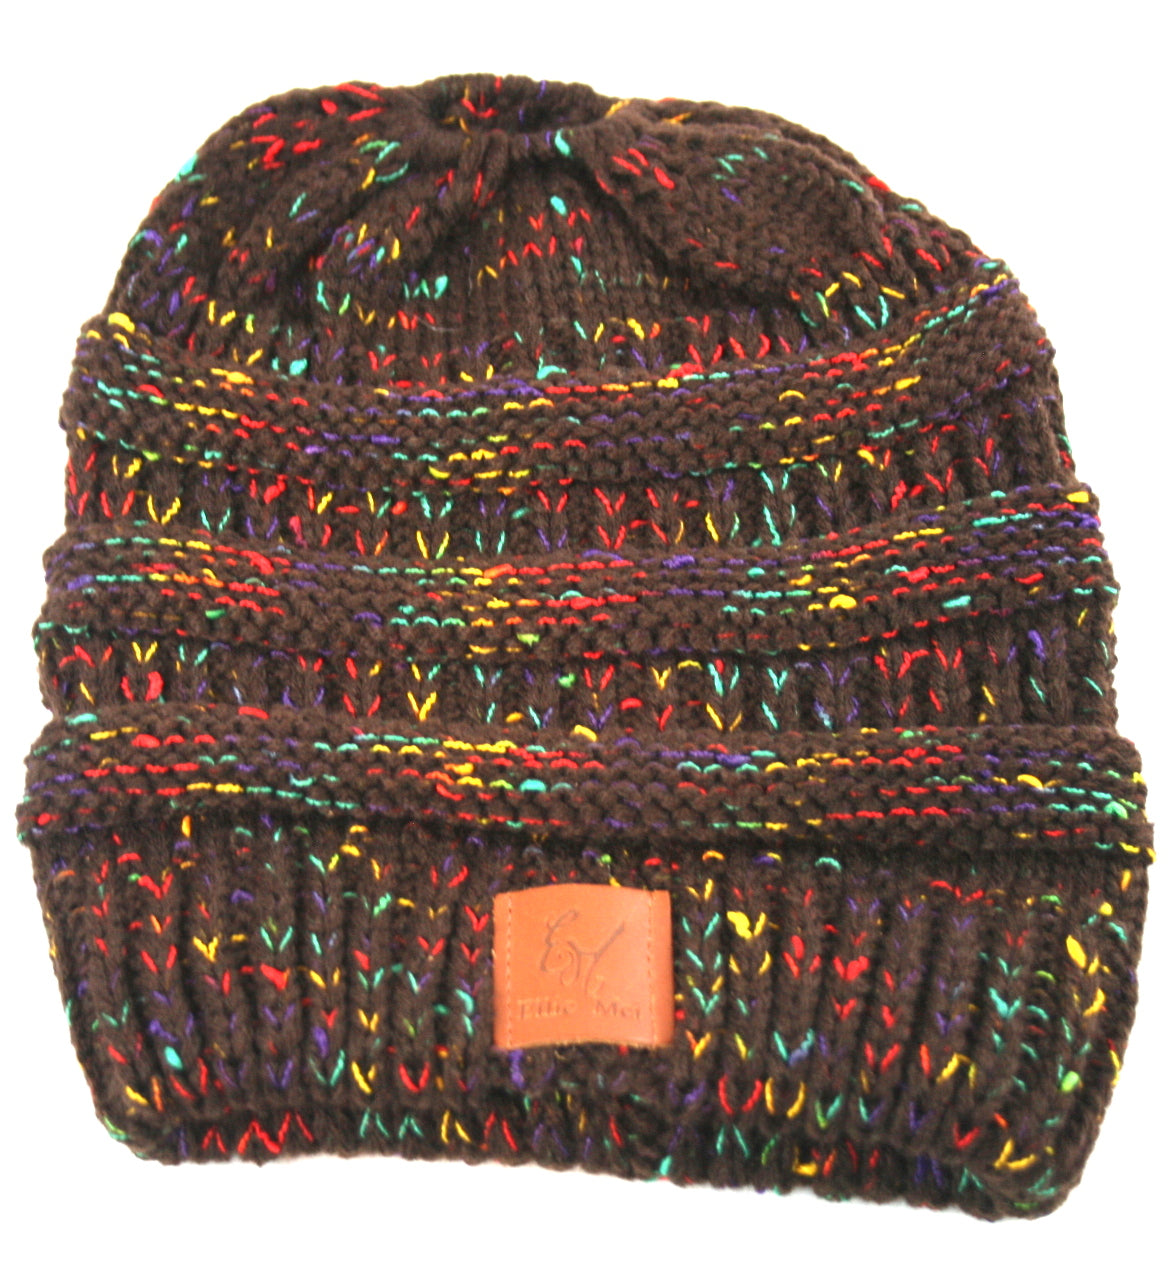 Unisex Colorful Knit Beanies  Warm Wool Multi Color Beanies  Ponytail Headband #EMWH18001-2